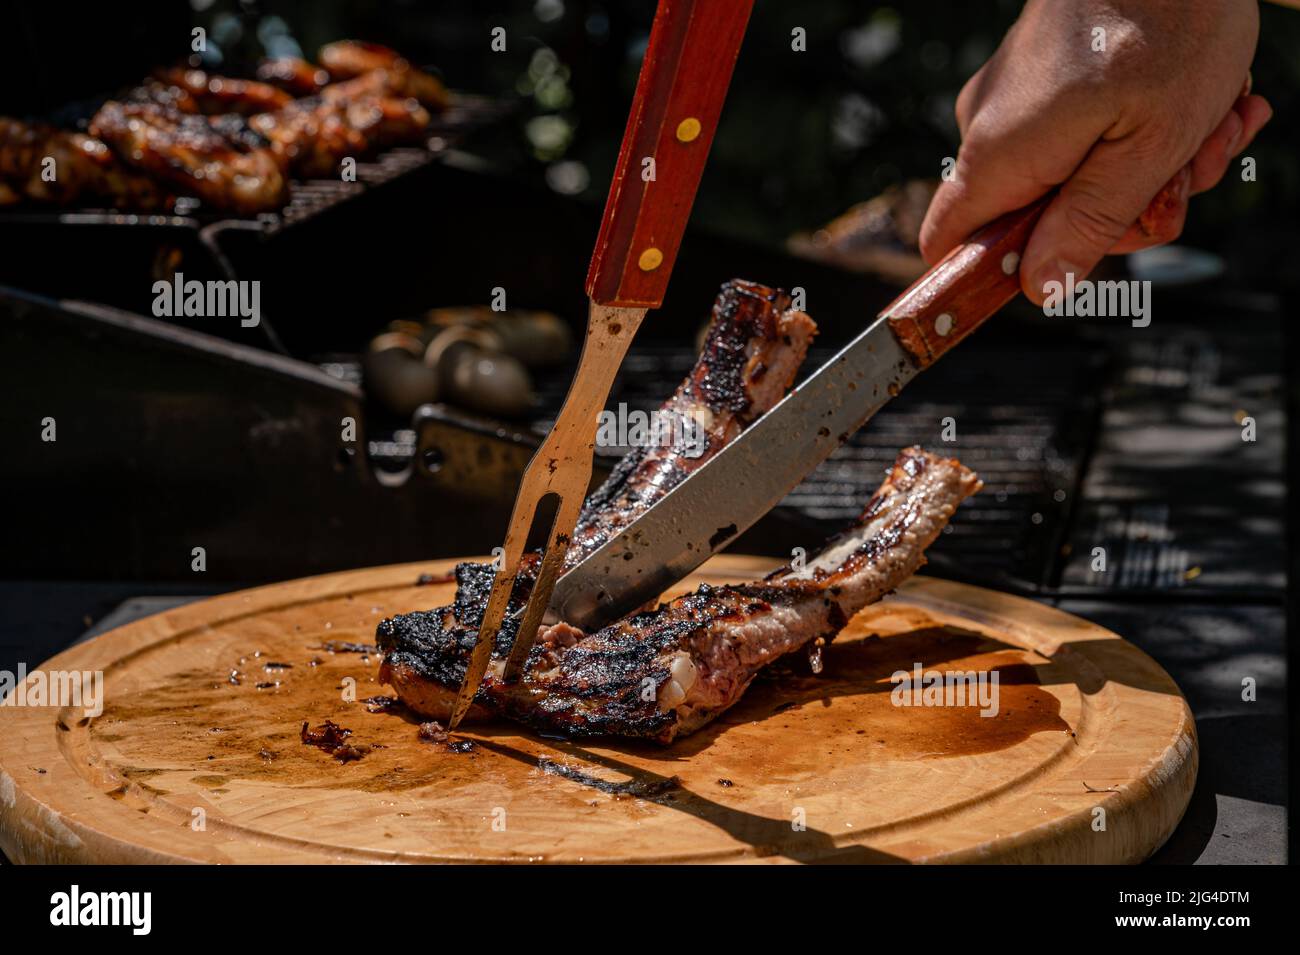 Hand cutting meat with knife and fork. Grilled ribs on the barbecue in summer. Preparaton of food. Stock Photo